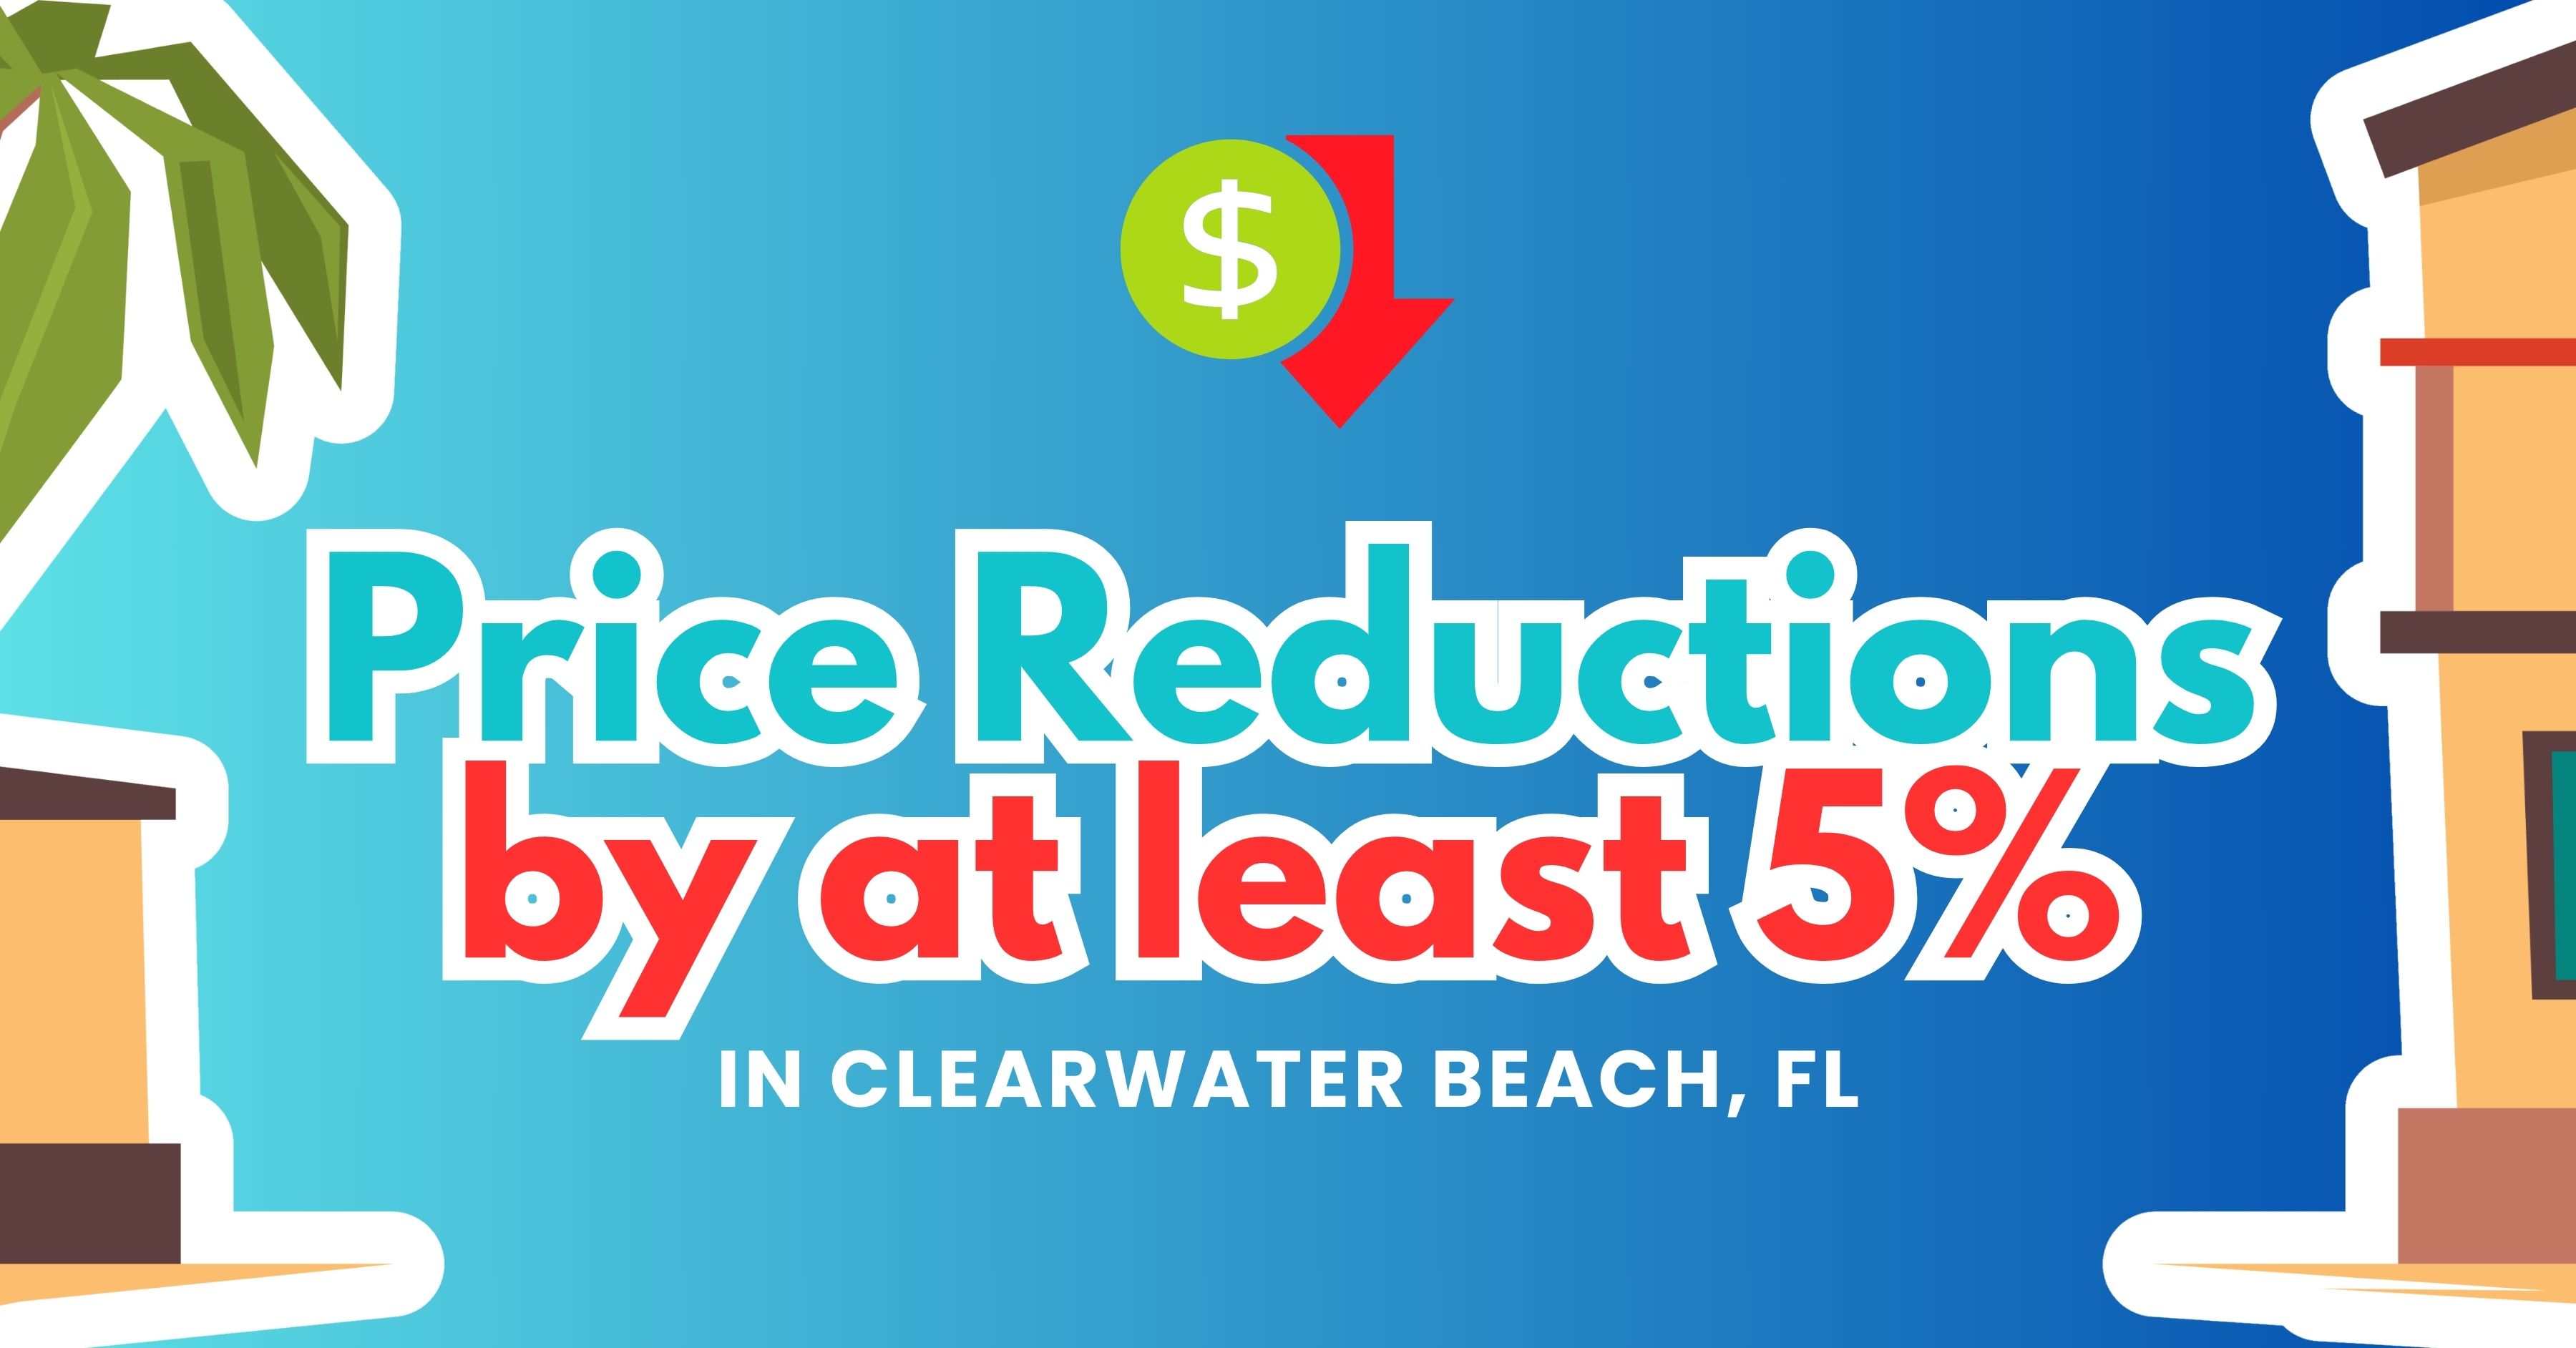 Price Reduction by at least 5% in Clearwater Beach, FL